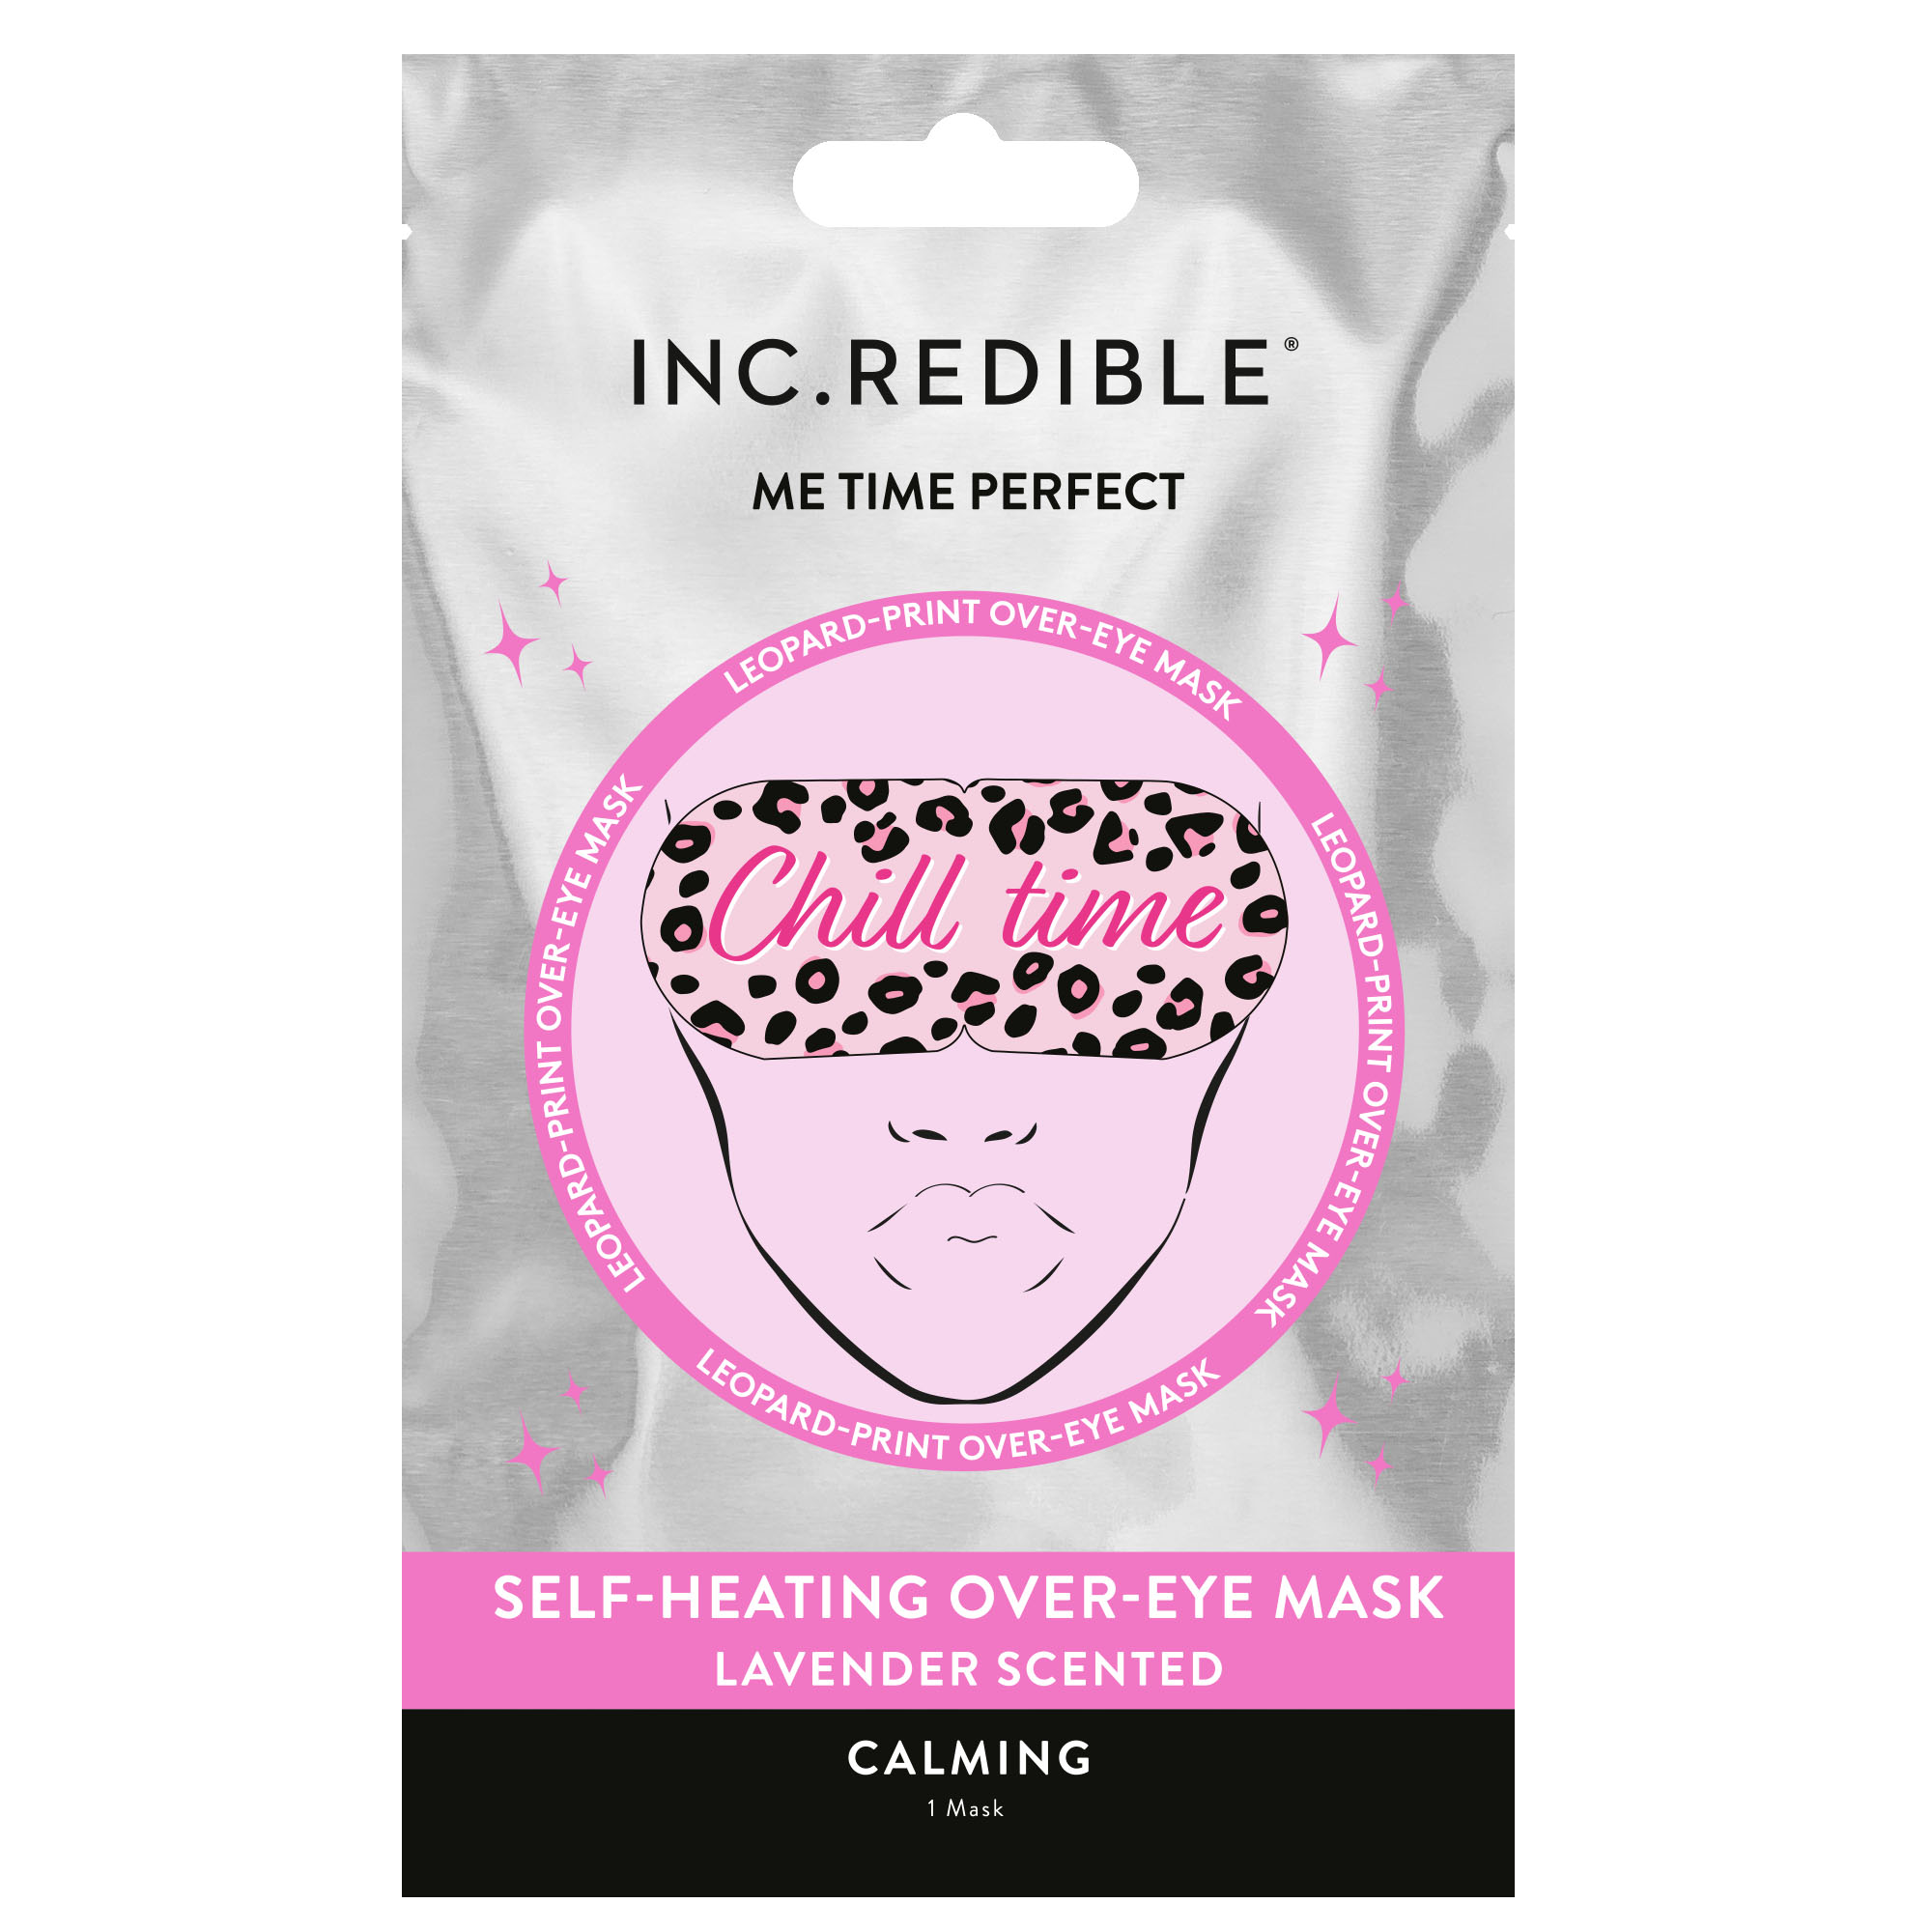 Inc.redible, Lavender Scented Heated Over-Eye Mask